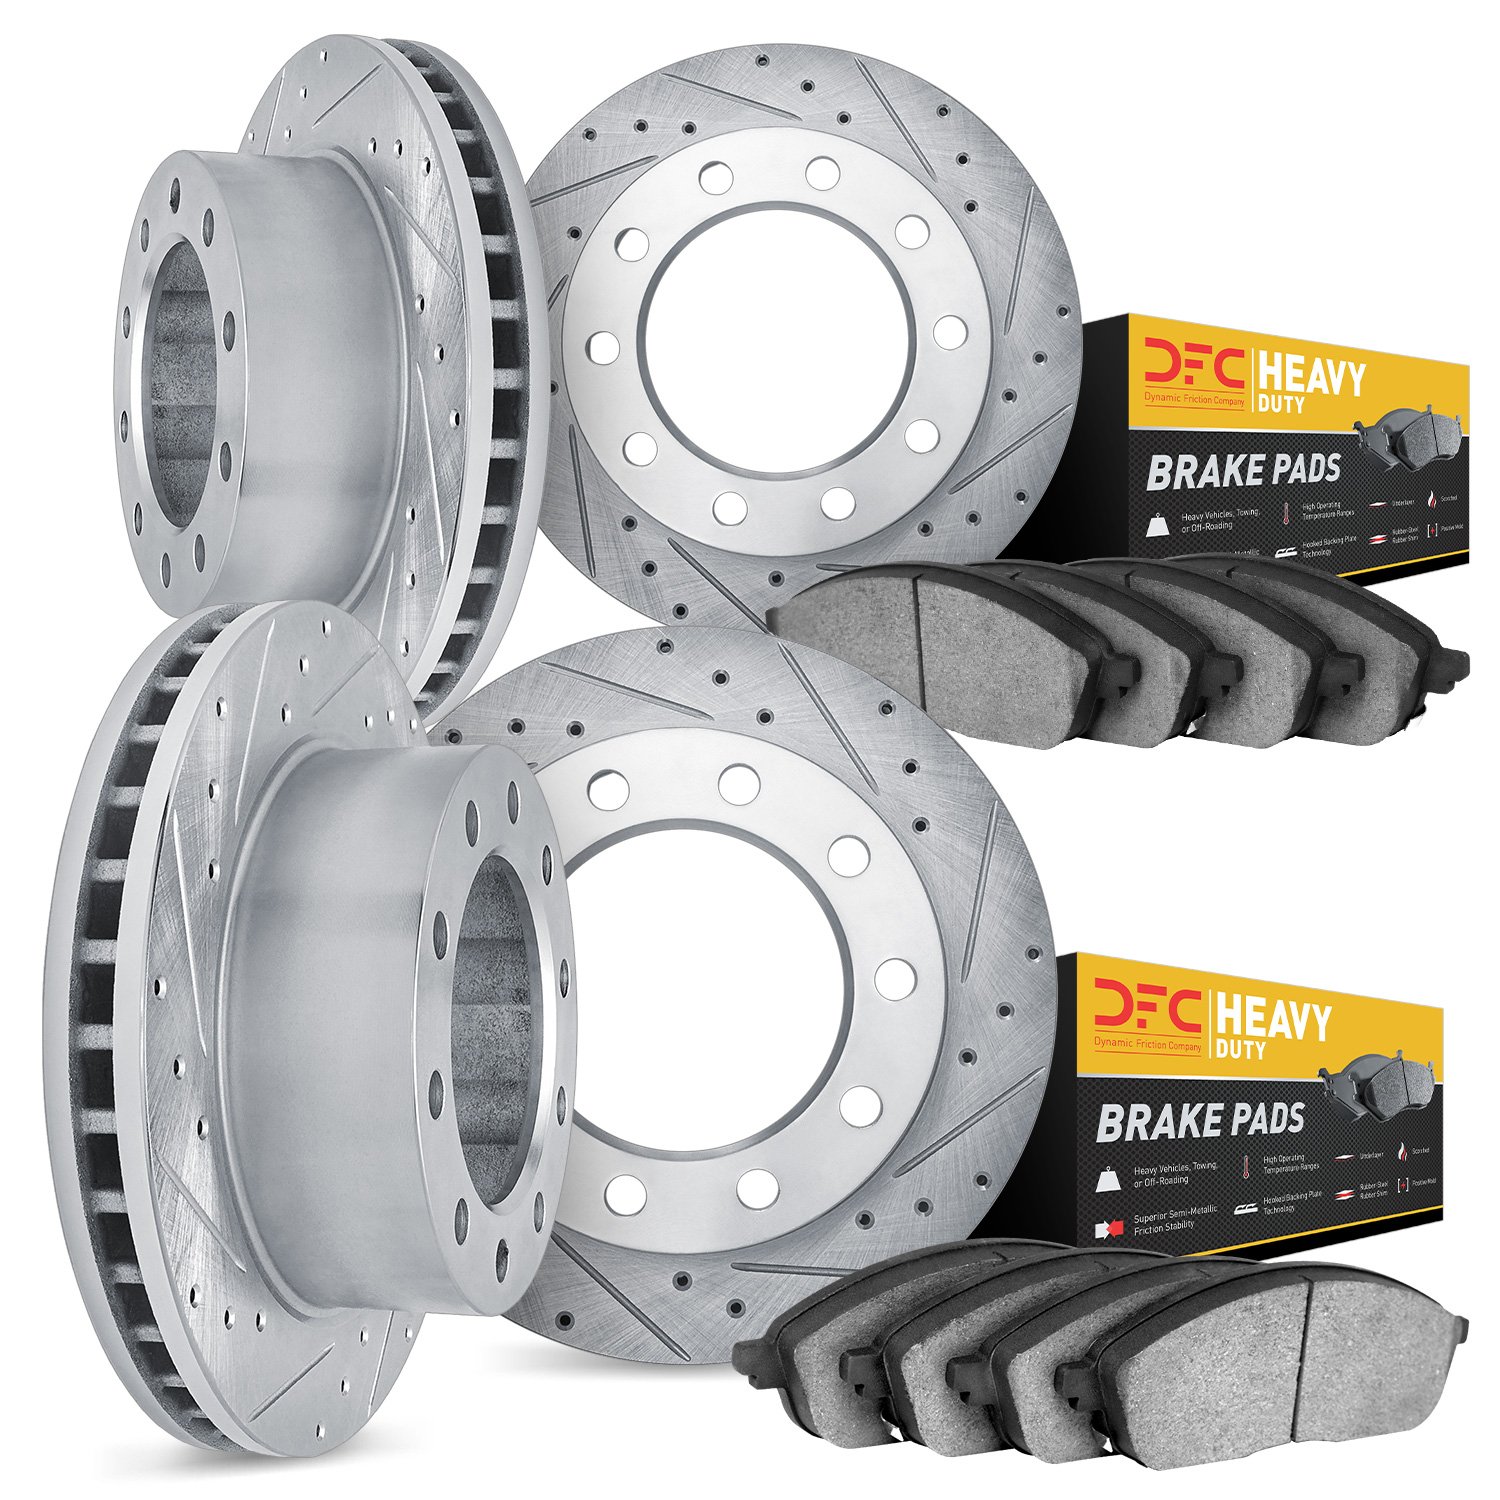 7204-48123 Drilled/Slotted Rotors w/Heavy-Duty Brake Pads Kit [Silver], 1998-1999 GM, Position: Front and Rear